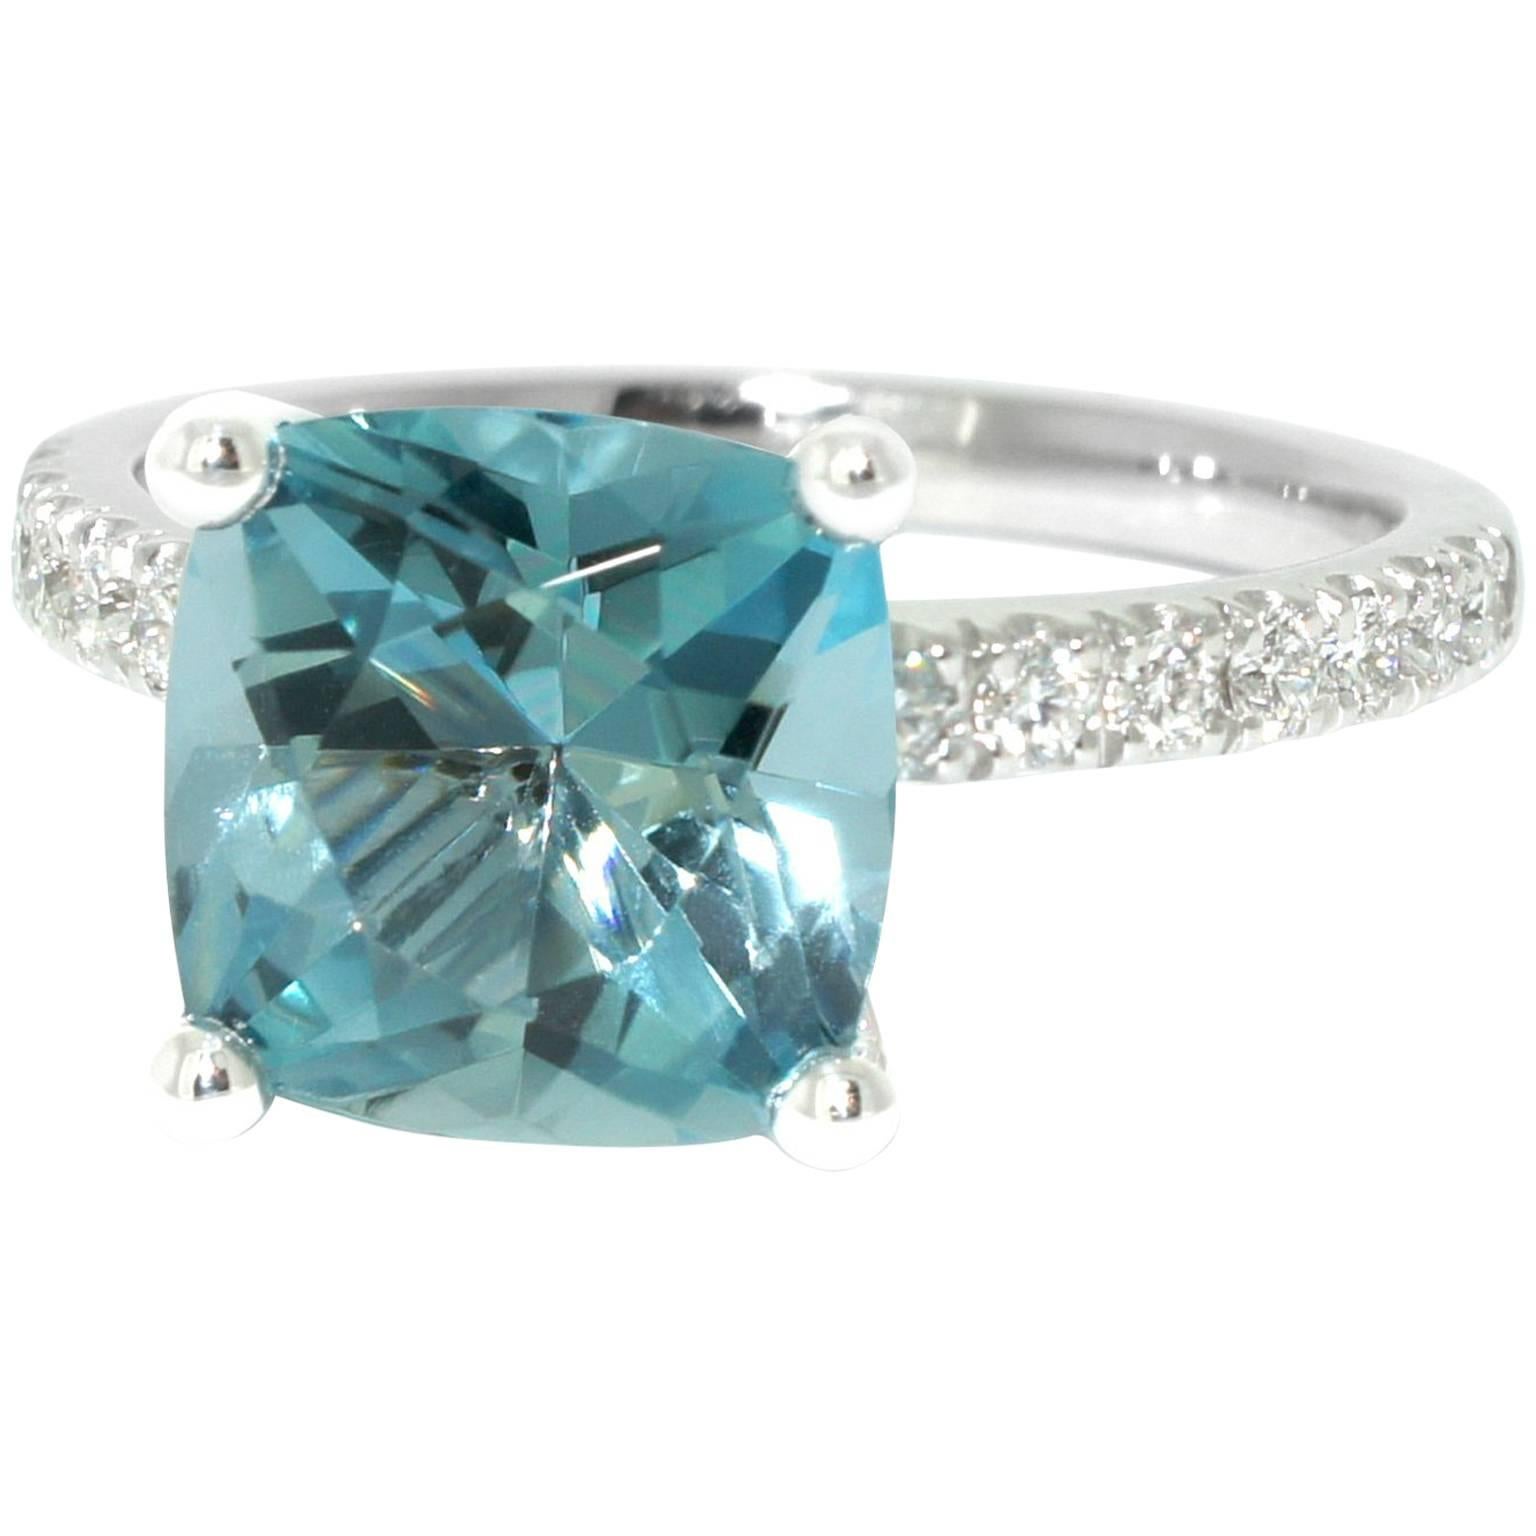 Set with a finest quality blue aquamarine, this solitaire engagement ring is elegant and timeless. Handmade in our Sydney studios in 18 karat white gold, this beautiful bridal ring sparkles with top quality diamonds set into the band. The setting is